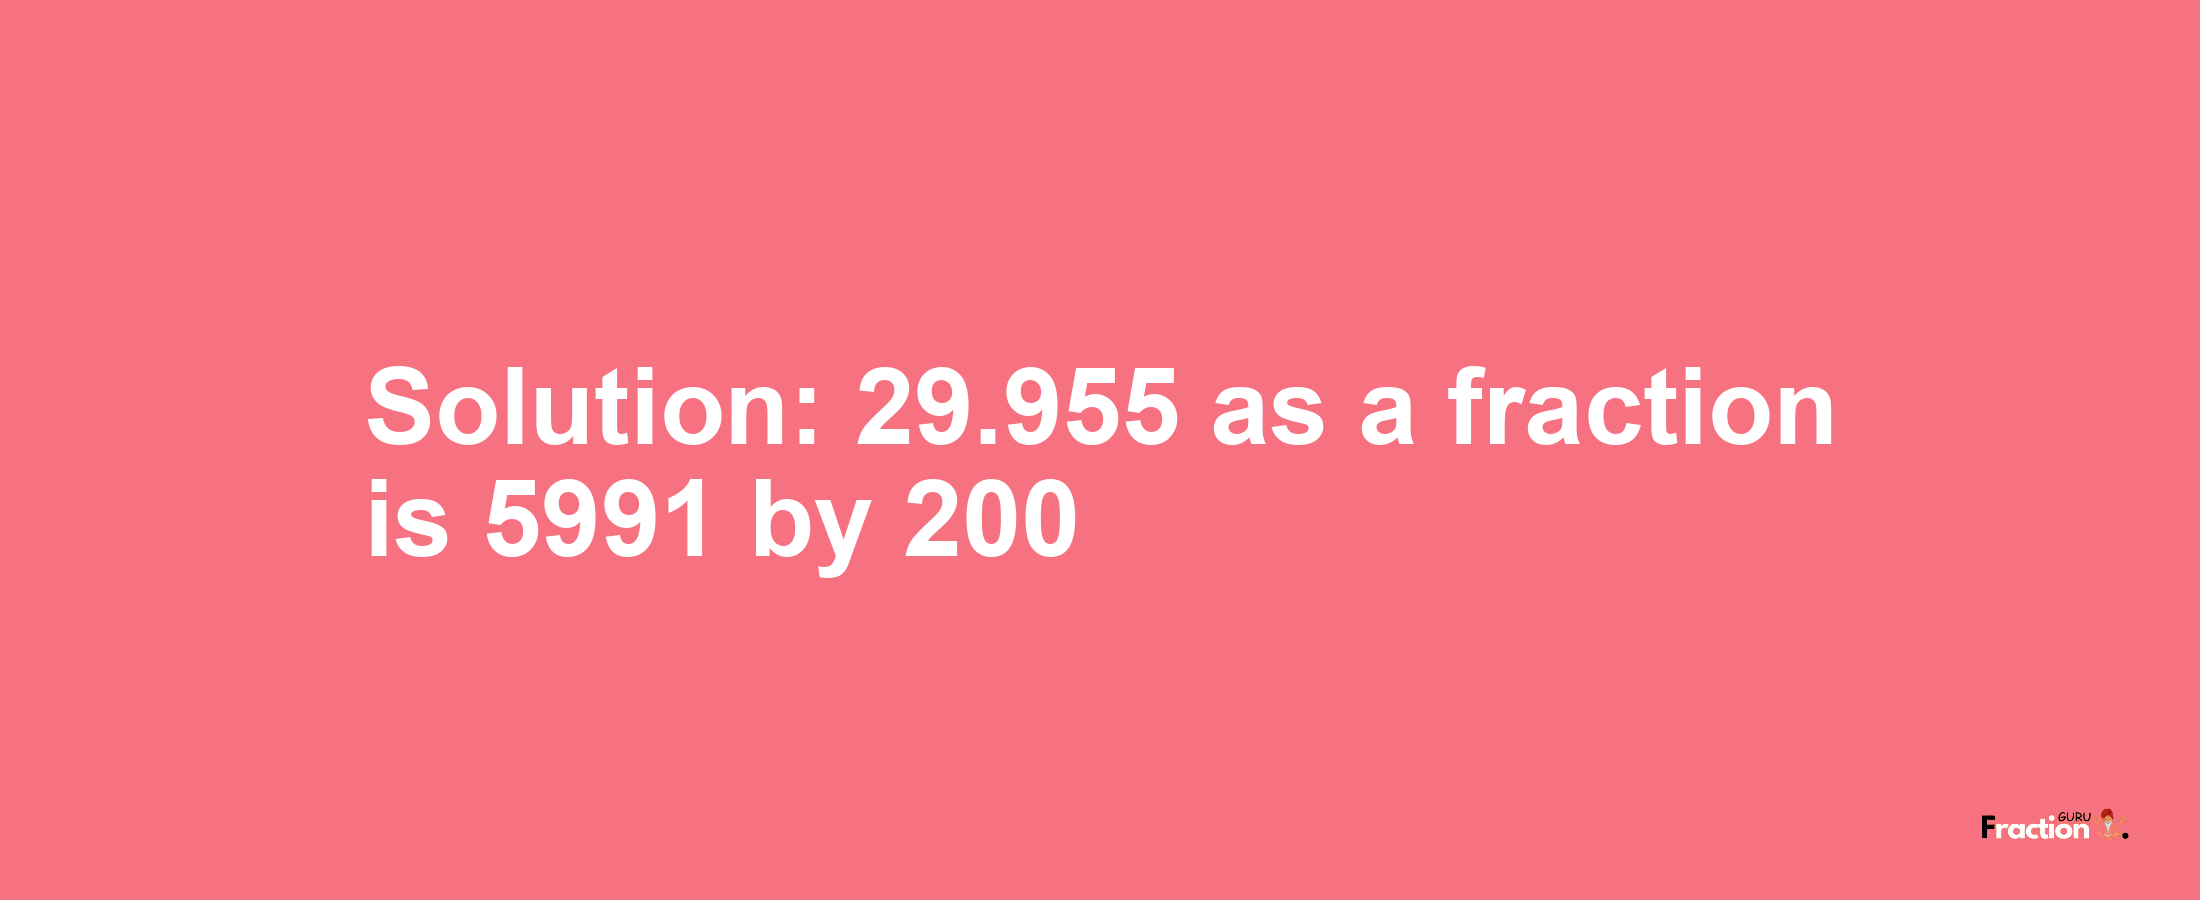 Solution:29.955 as a fraction is 5991/200